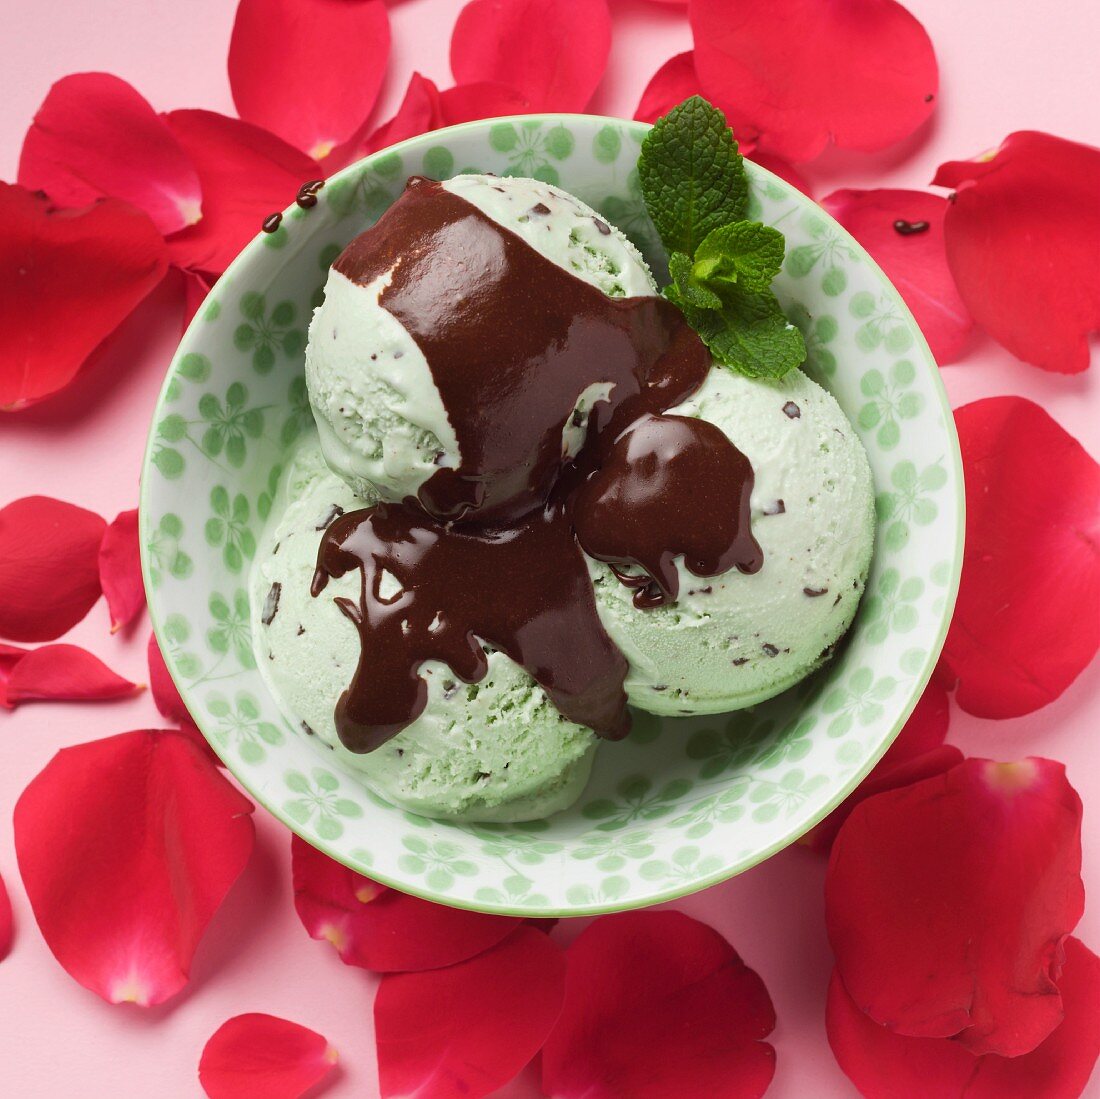 Mint chocolate chip ice cream in a bowl surrounded by rose petals